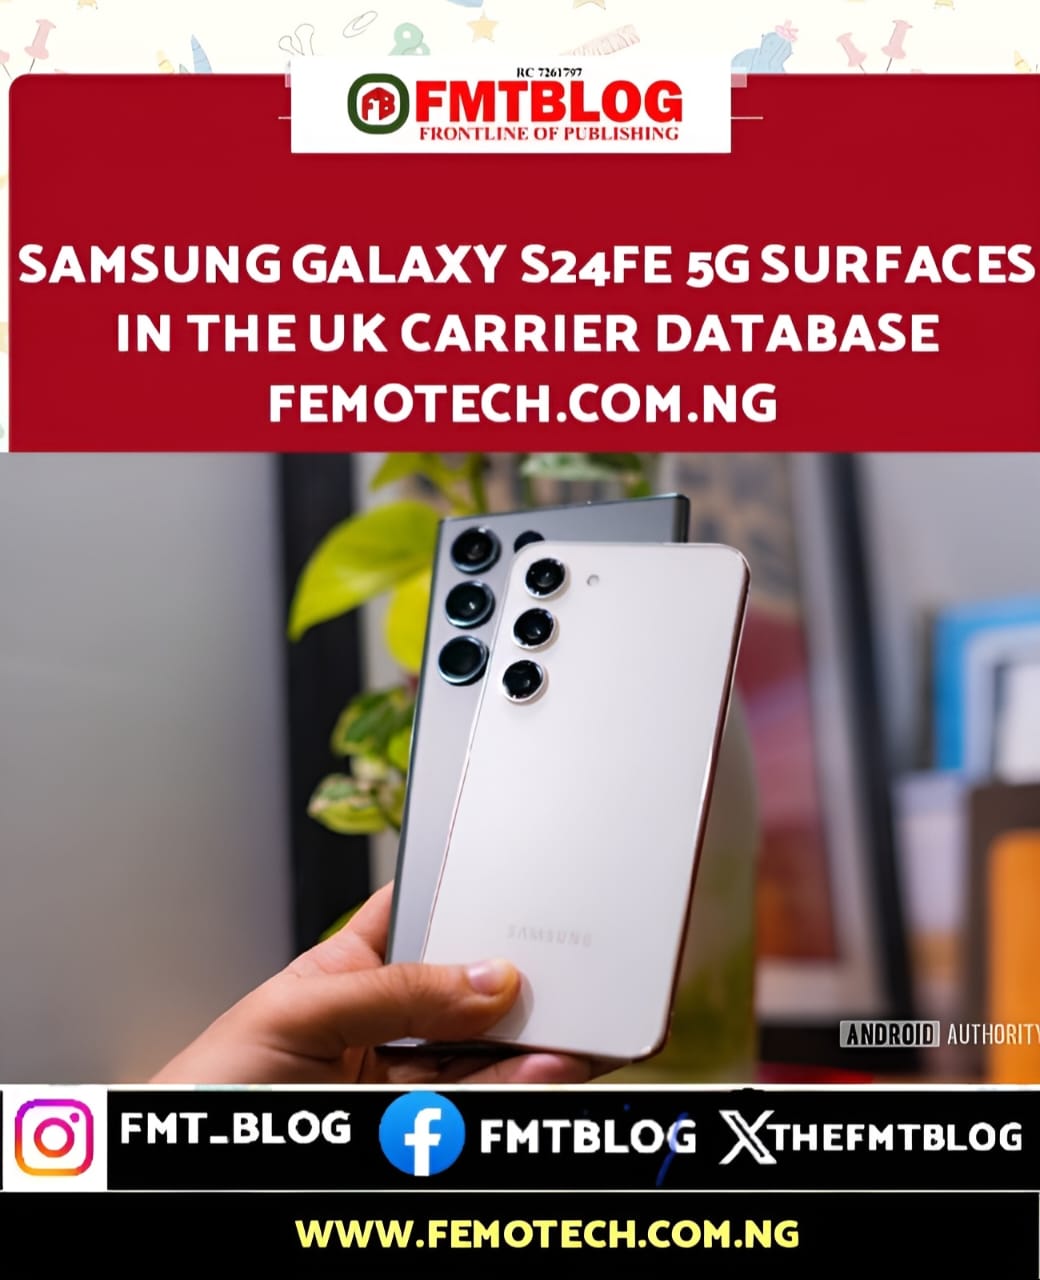 Samsung Galaxy S24 FE 5G Surfaces In The UK Carrier Database